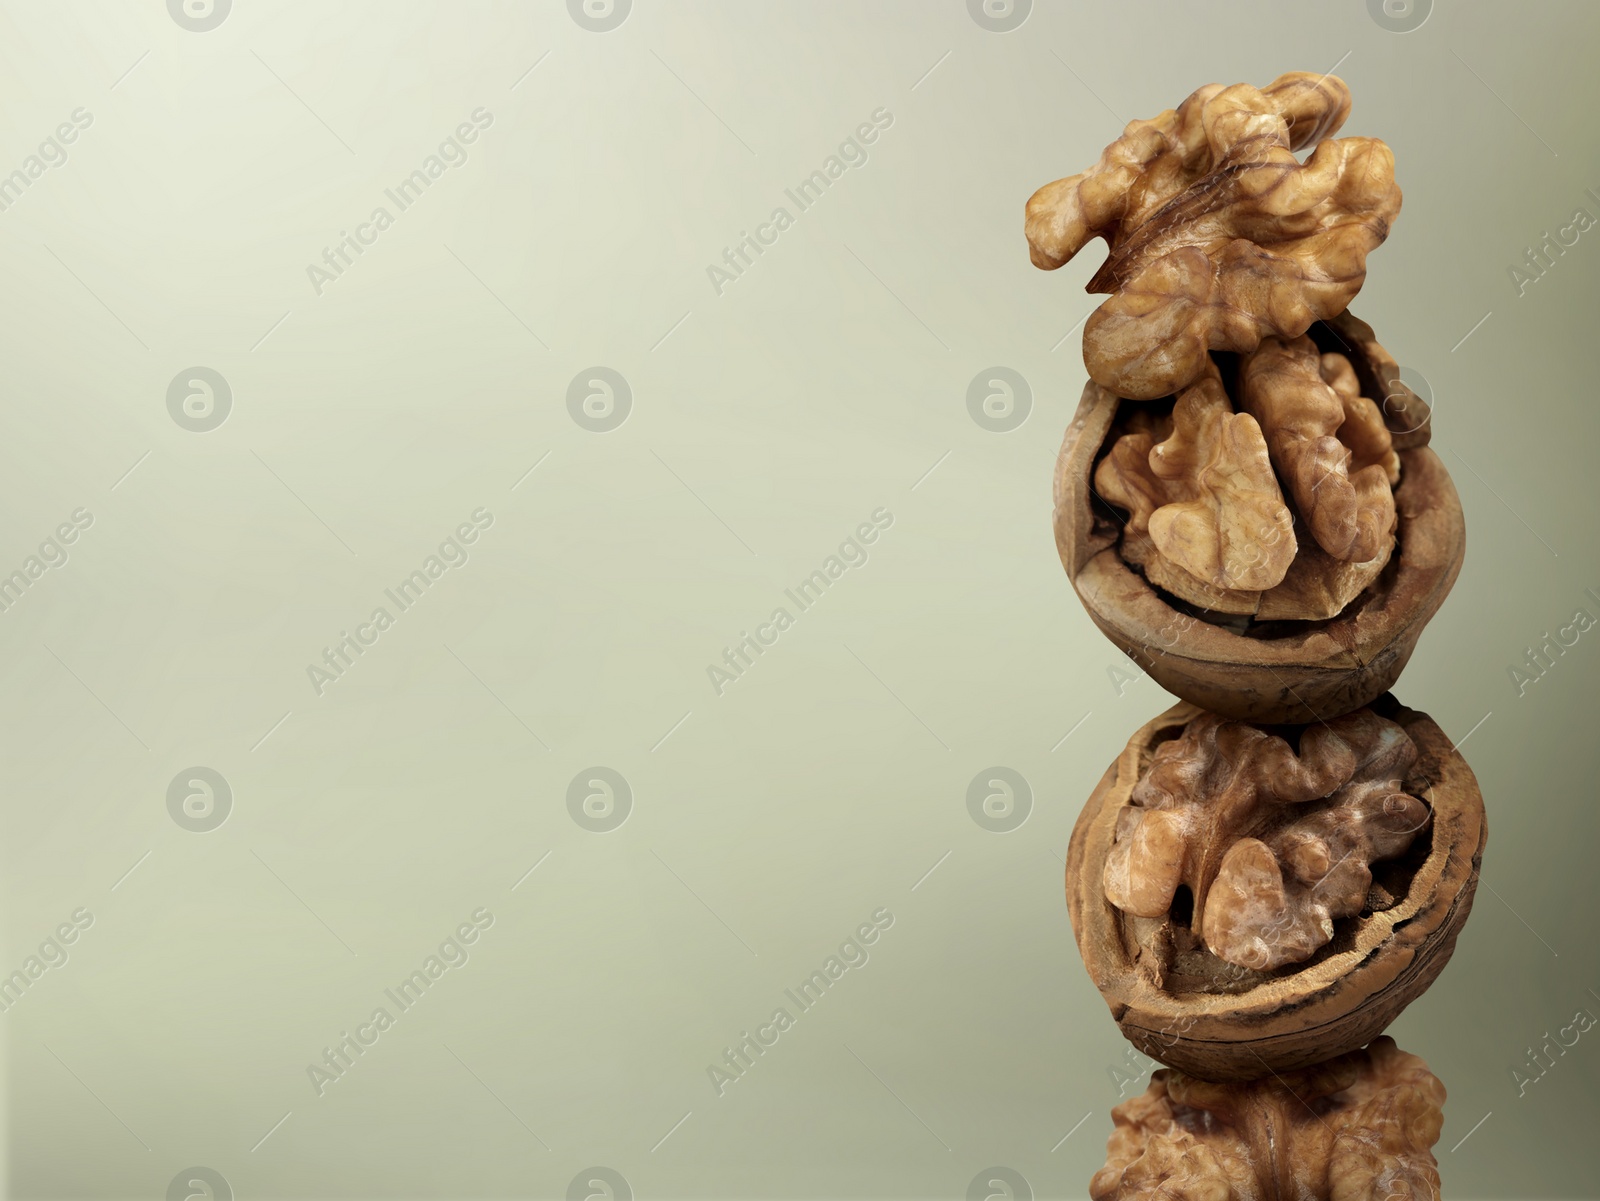 Image of Stacked walnuts on light grey gradient background, space for text